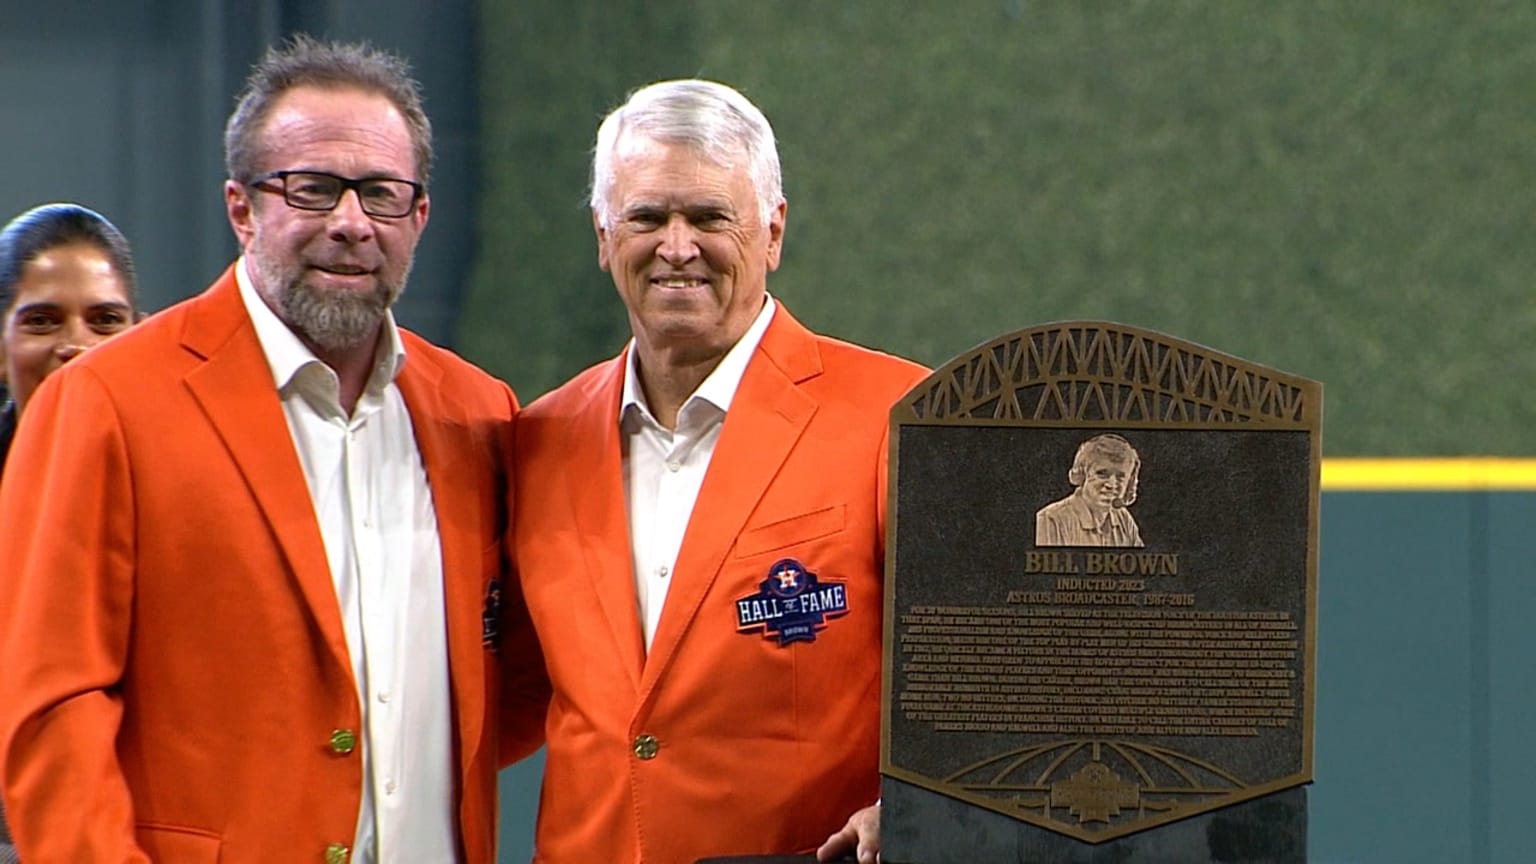 Bill Doran, Bill Brown recognized as new Astros Hall of Fame members